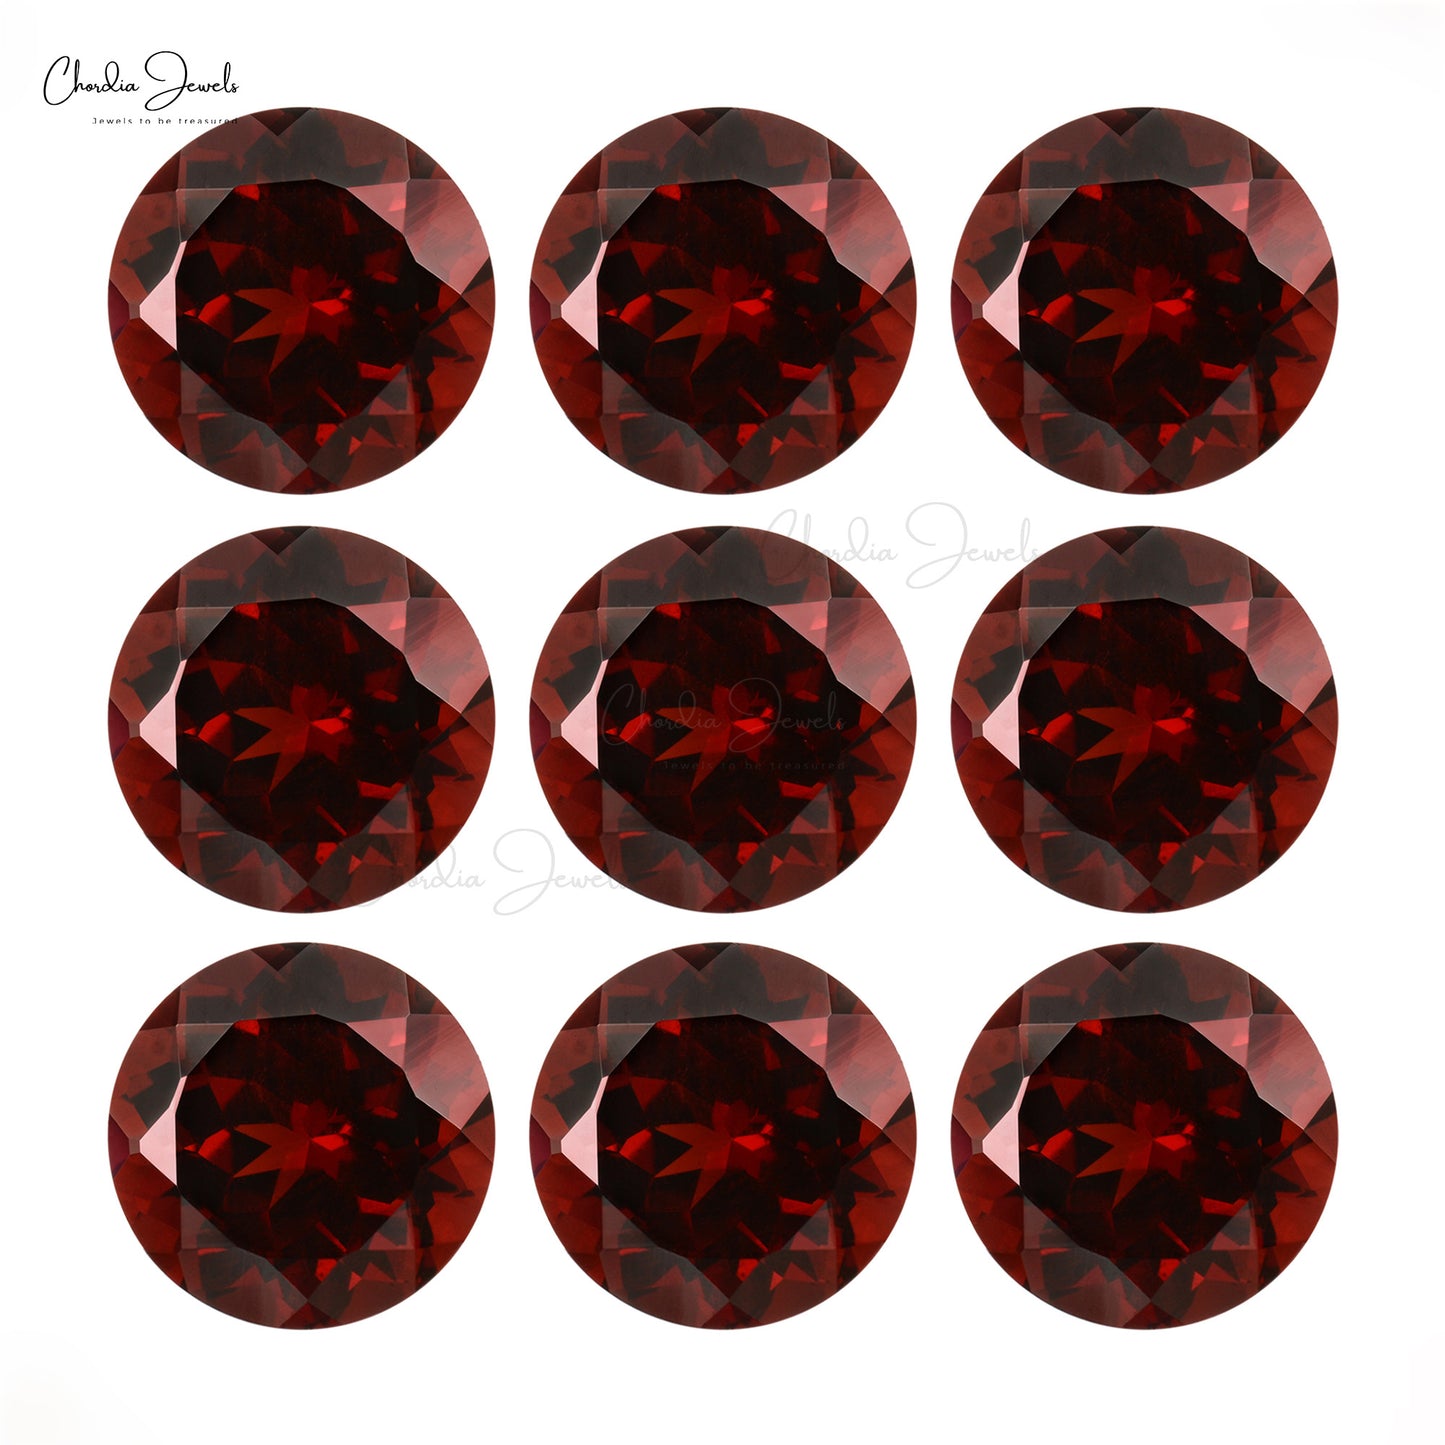 Load image into Gallery viewer, High Quality Red Garnet 7mm Round Cut Gemstone for Engagement Ring, 1 Piece
